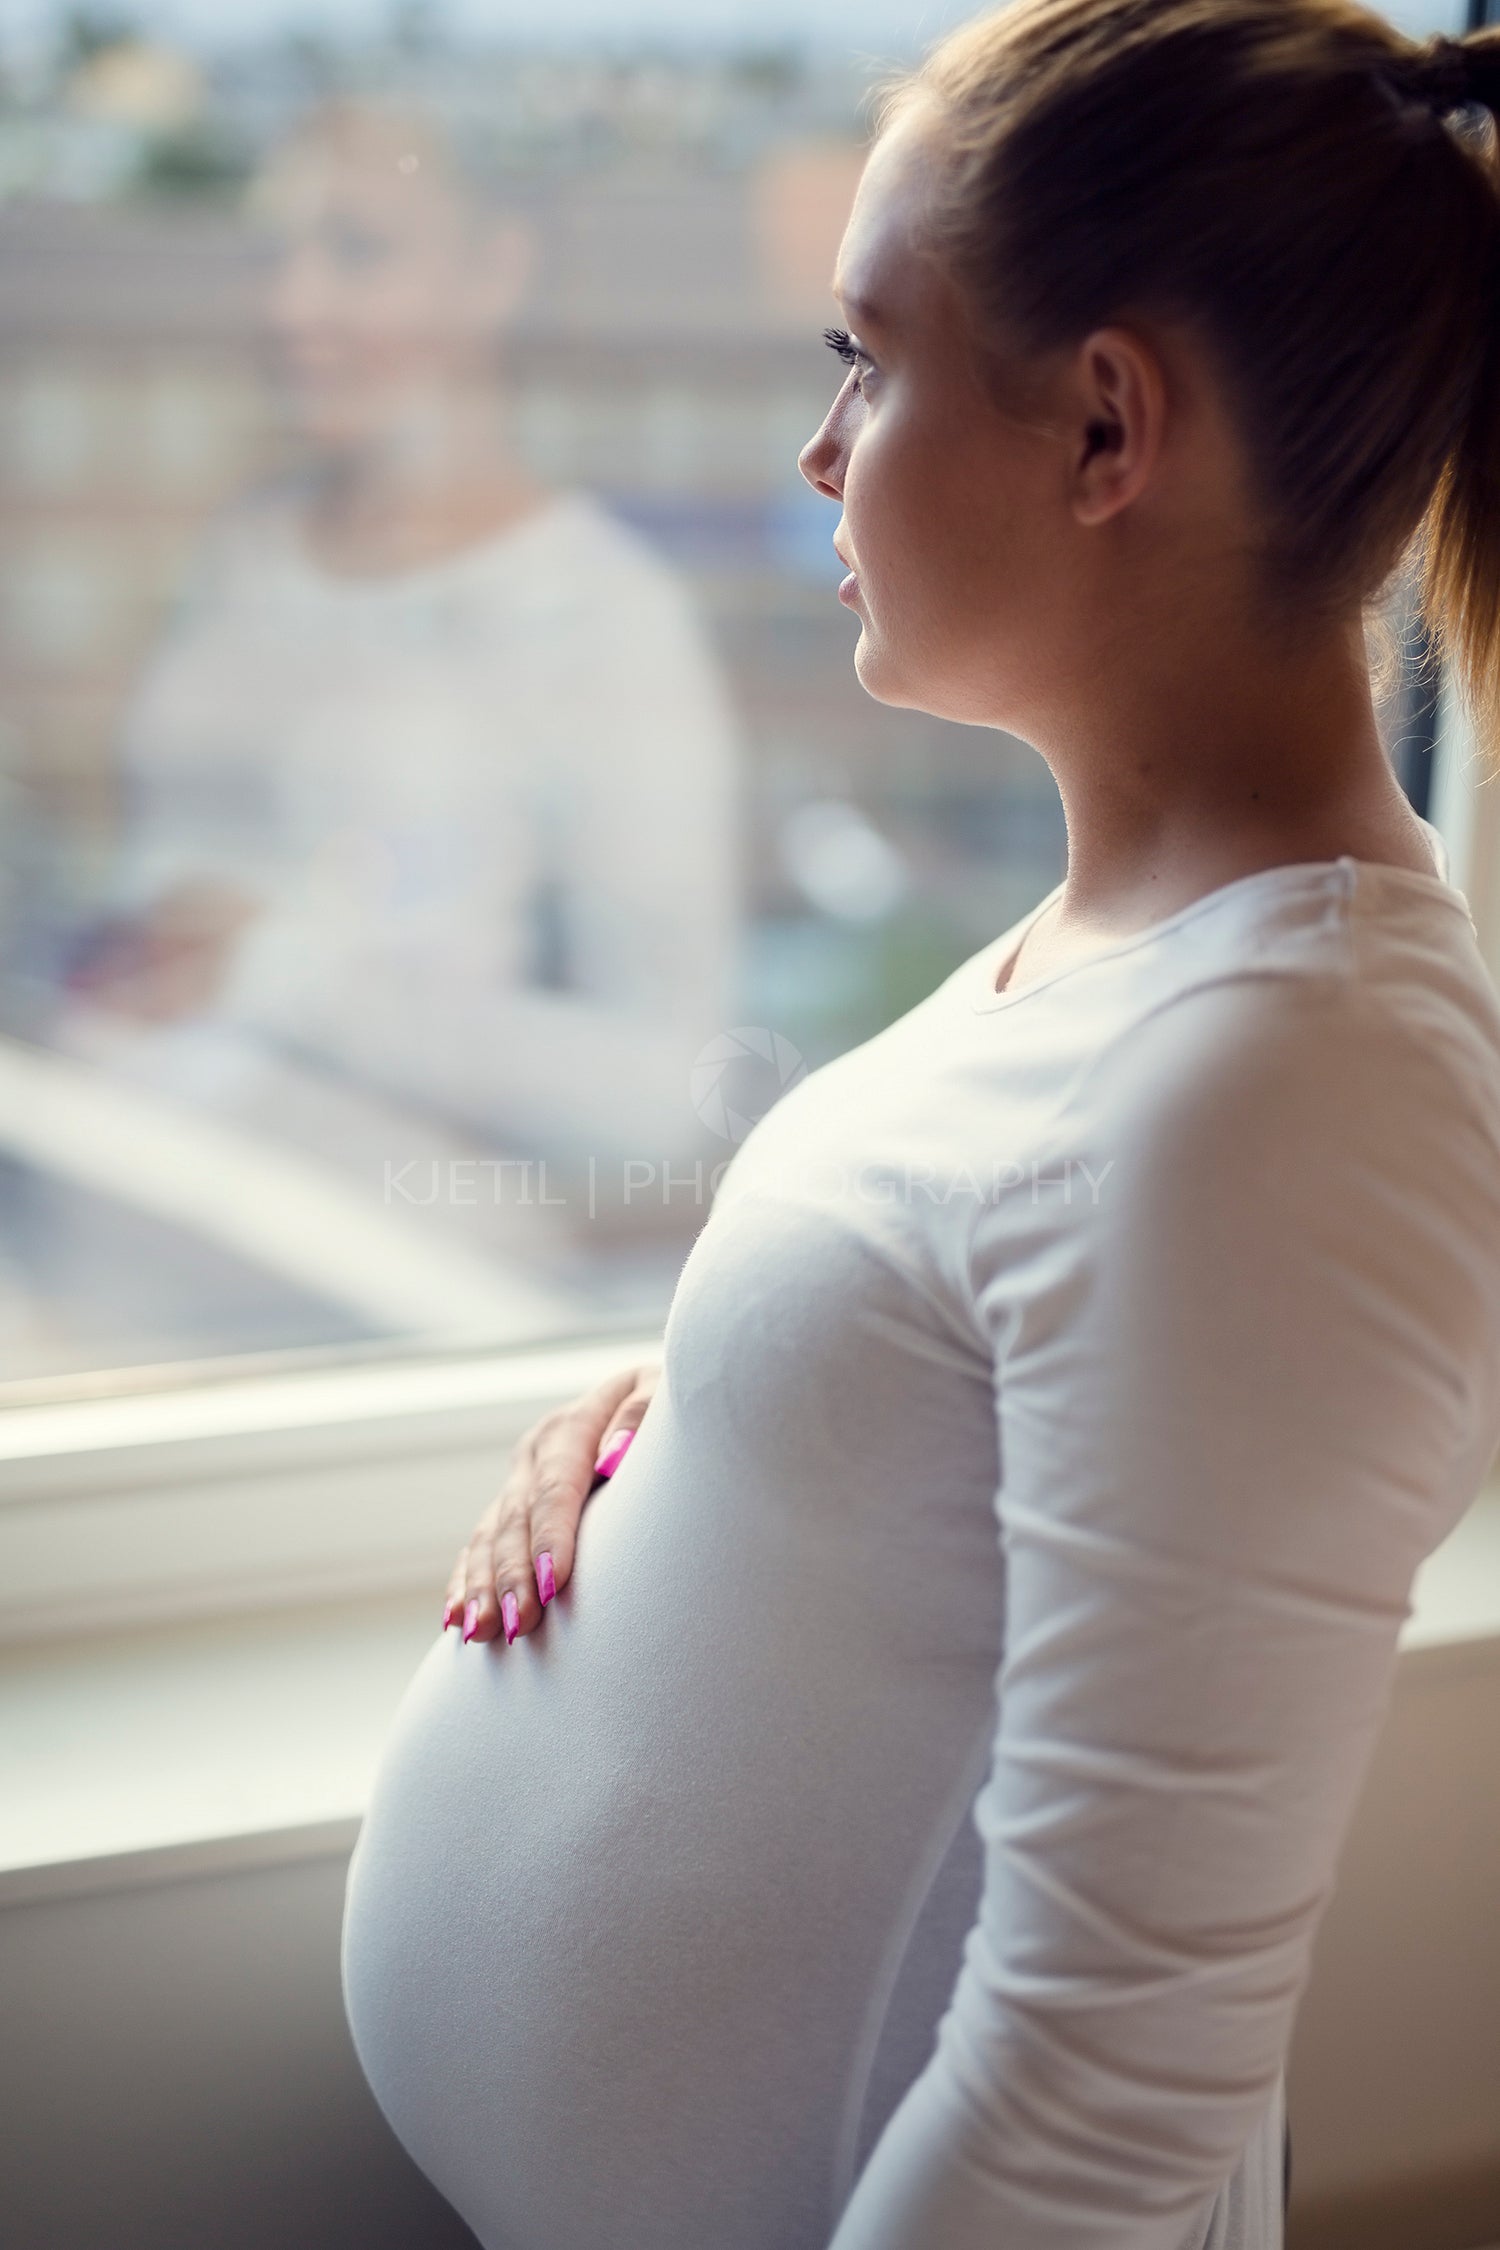 Young thoughtful pregnant woman looking out the window